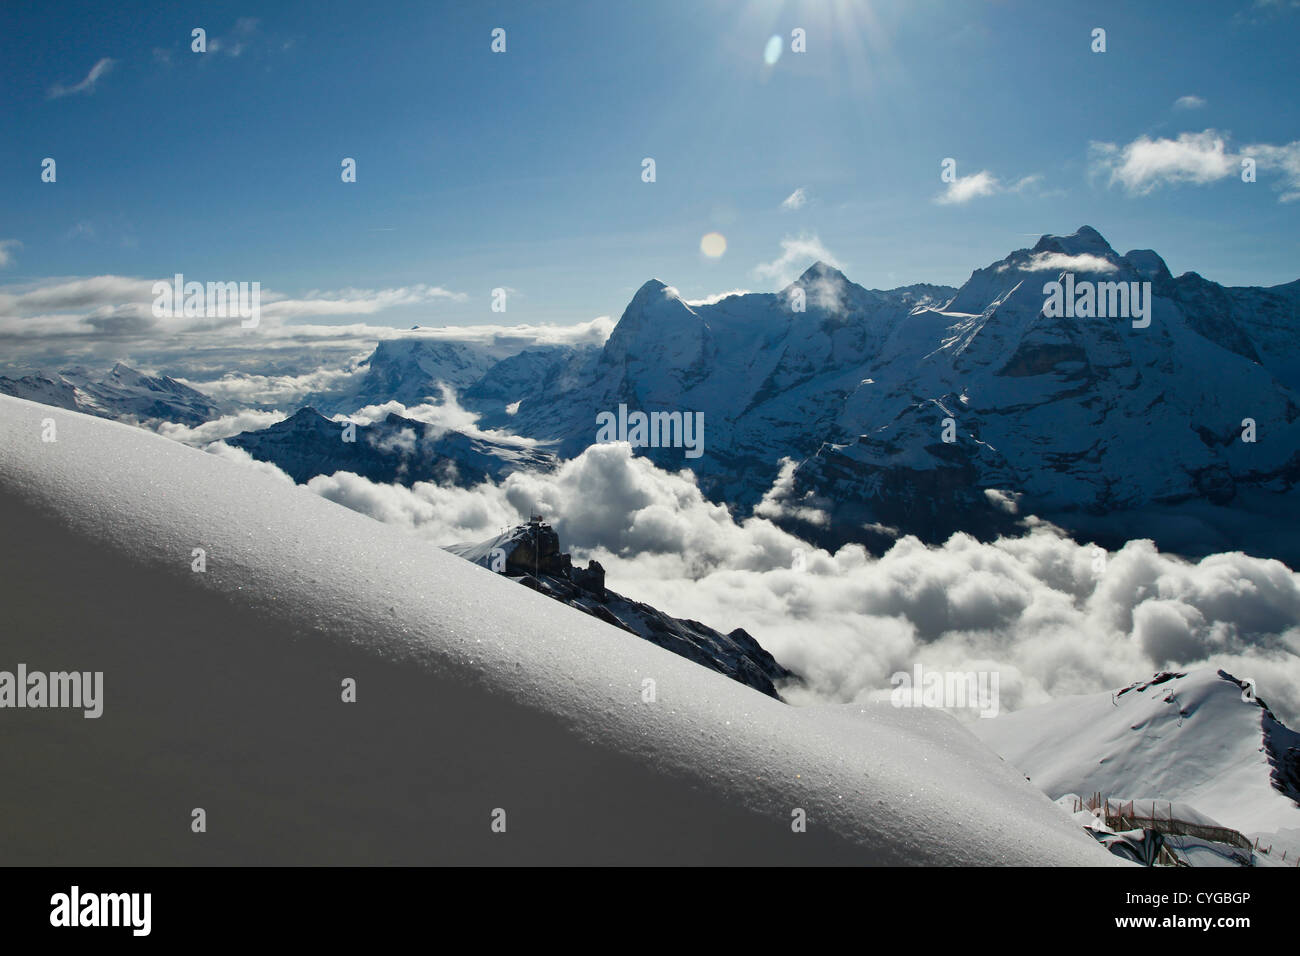 The Eiger , Monch, and Jungfrau Range. Swiss Alps, Berner Oberland. Views from Piz Gloria atop the Schilthorn Mountain Stock Photo